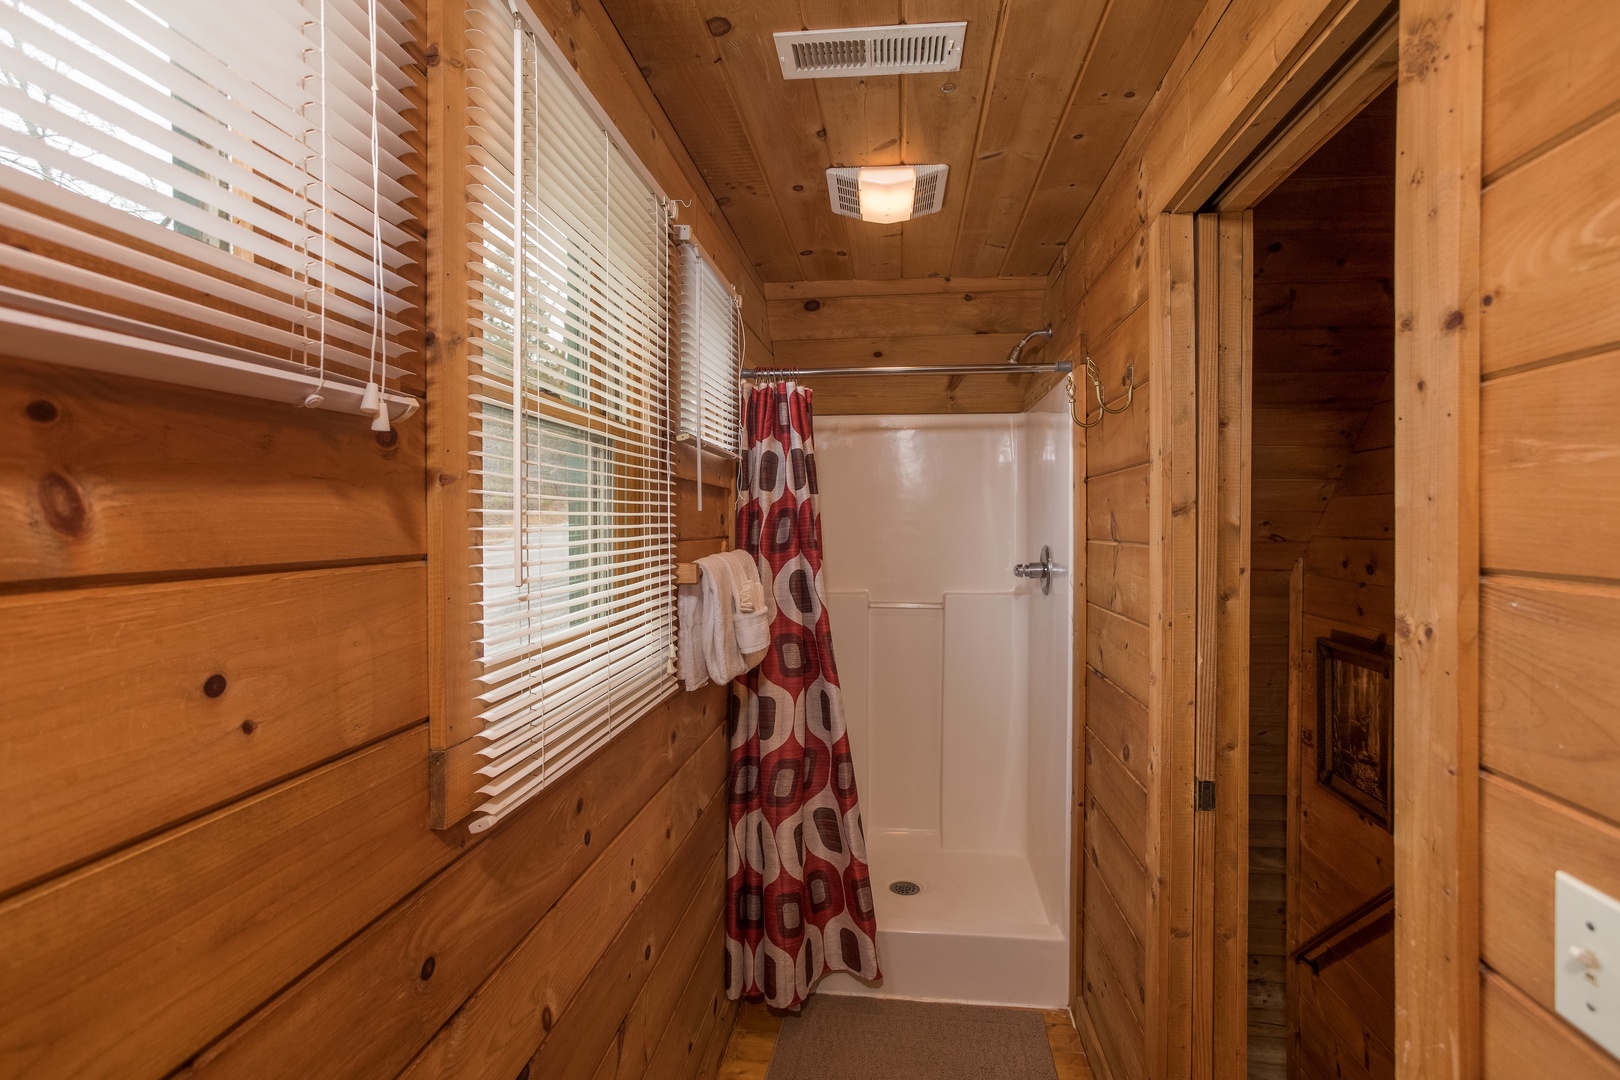 Shower at Hanky Panky, a 1-bedroom cabin rental located in Pigeon Forge